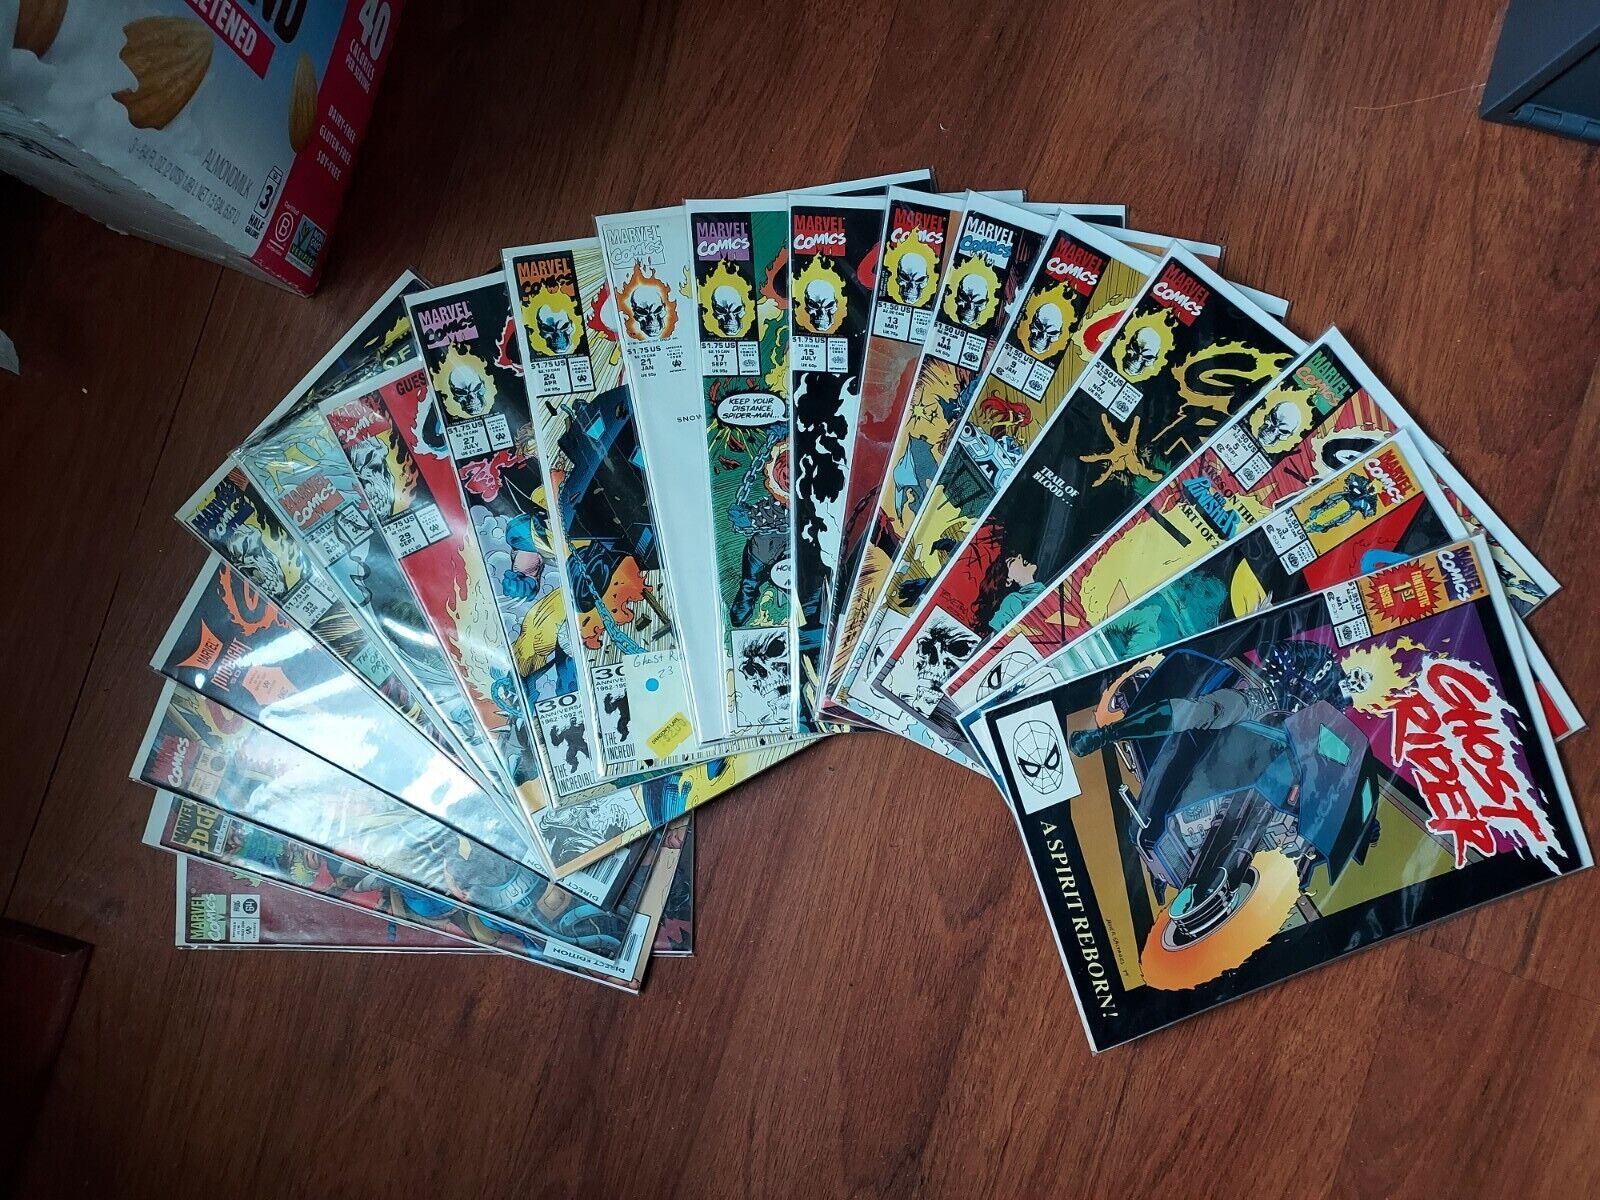 Ghost Rider #1 Danny Ketch Lot 36 Books Keys 1st Appearances And More 1-17 +